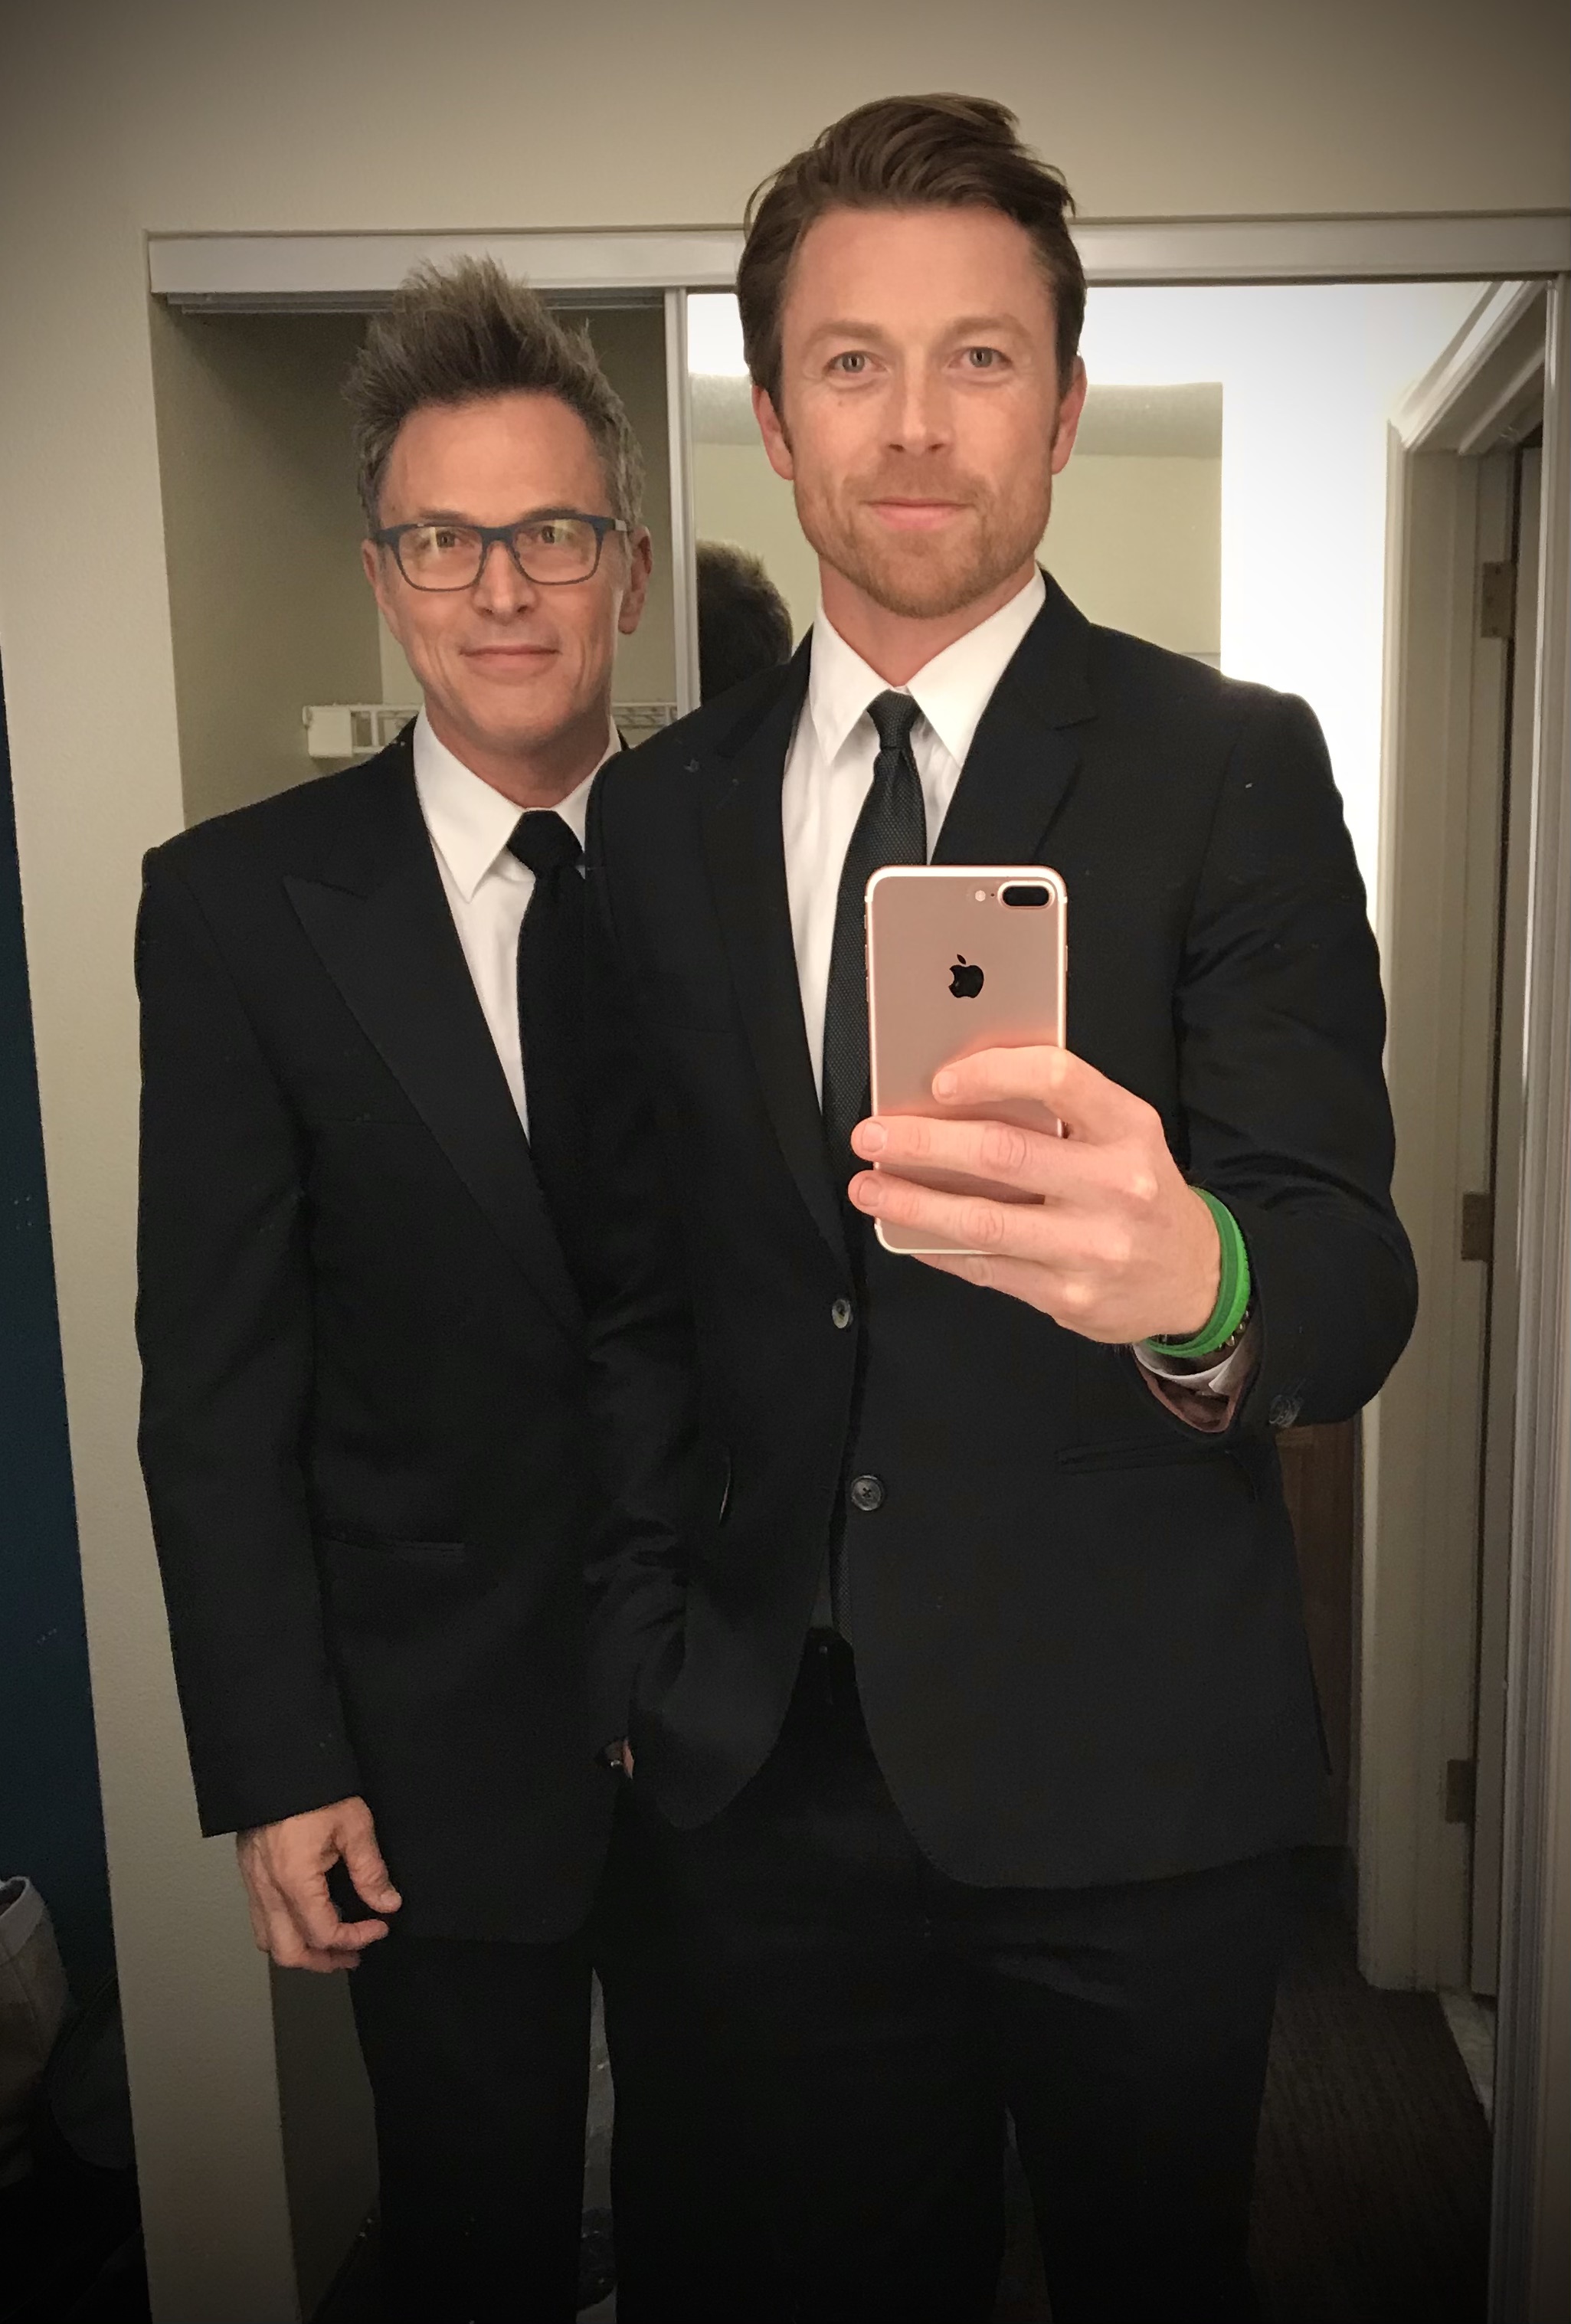 Tim Daly on Twitter: "HUMANS!!! #ThrowbackThursday to some Men in at @RBronk's wedding with @thesamdaly, almost exactly 3 years ago… #tbt https://t.co/PfufgrjYl0" / Twitter